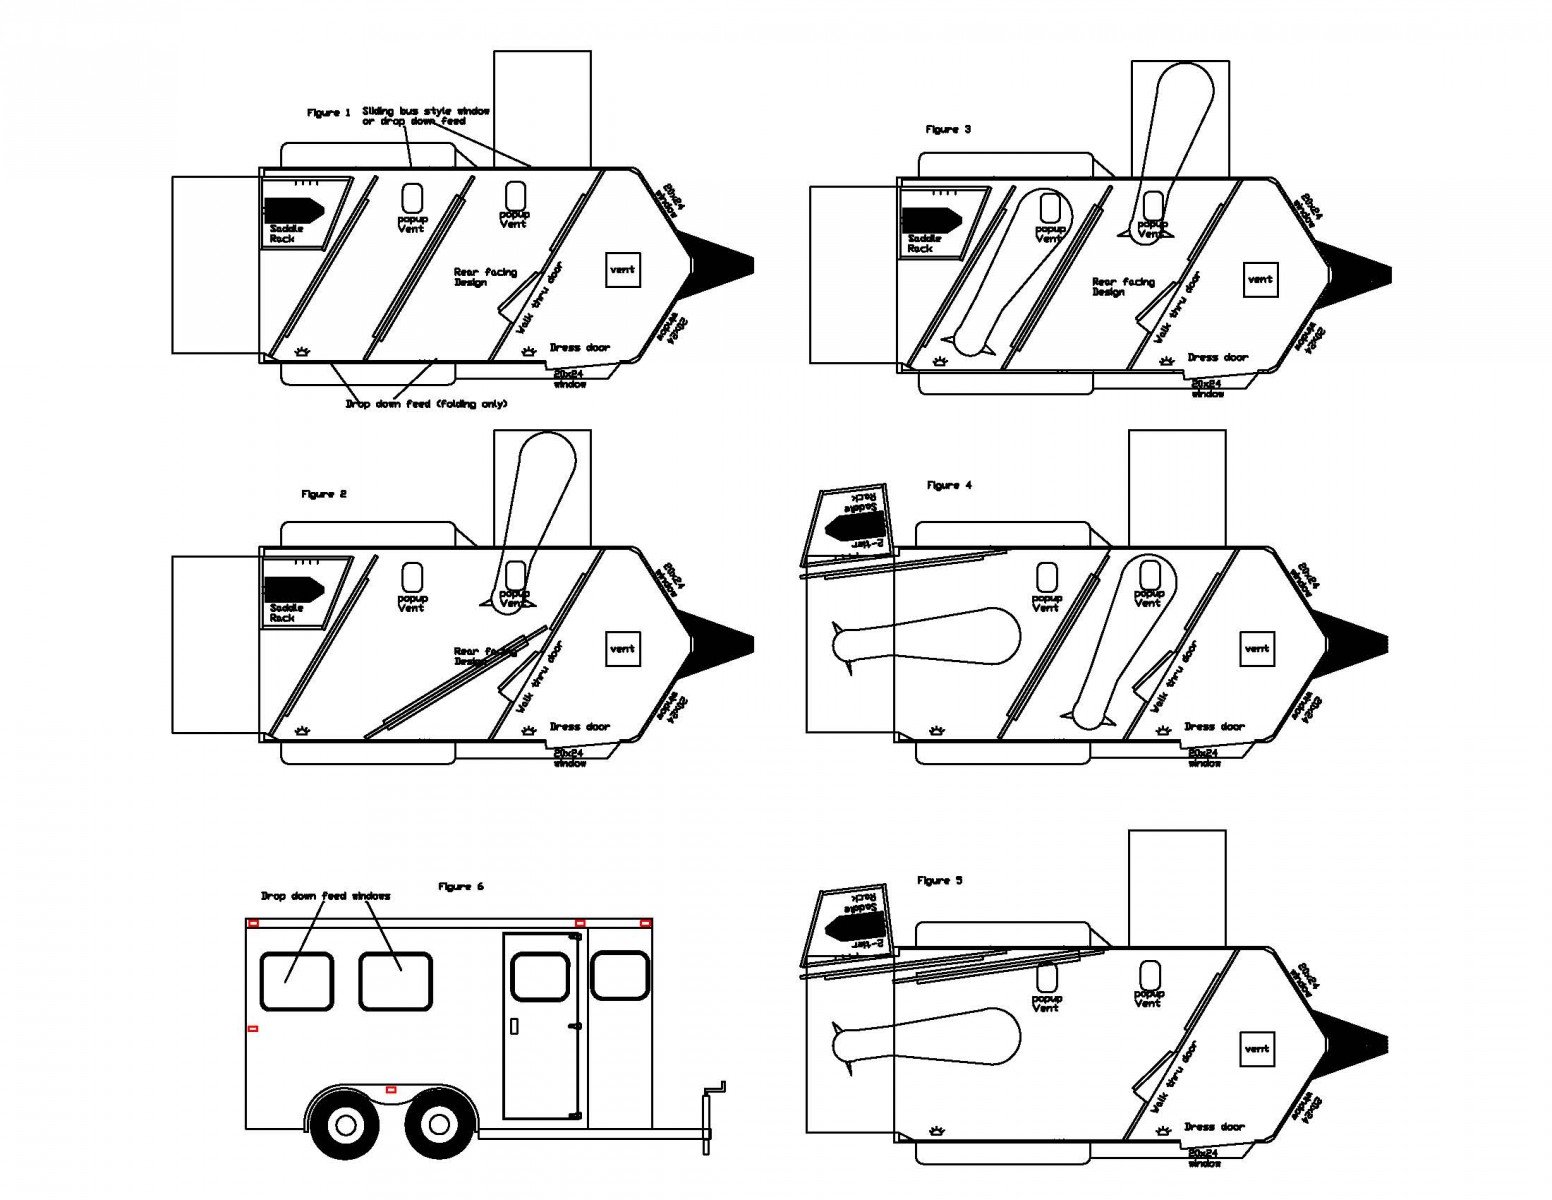 The Double D Trailer SafeTack Reverse Slant Load design addresses the problems associated with standard reverse slant trailer designs.